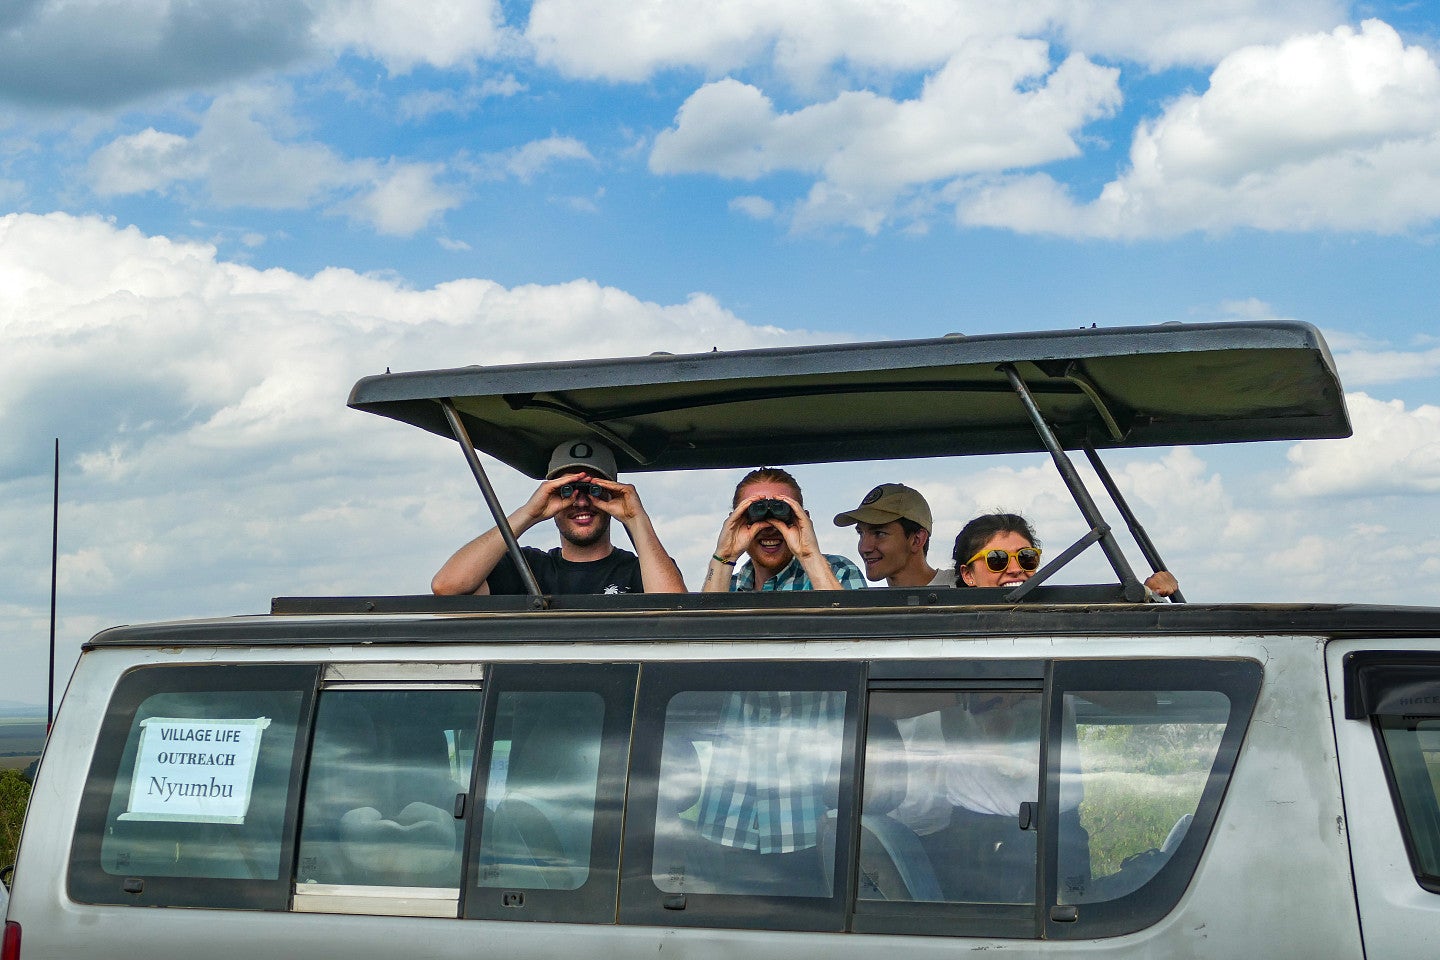 Photo of another group of UO students on safari